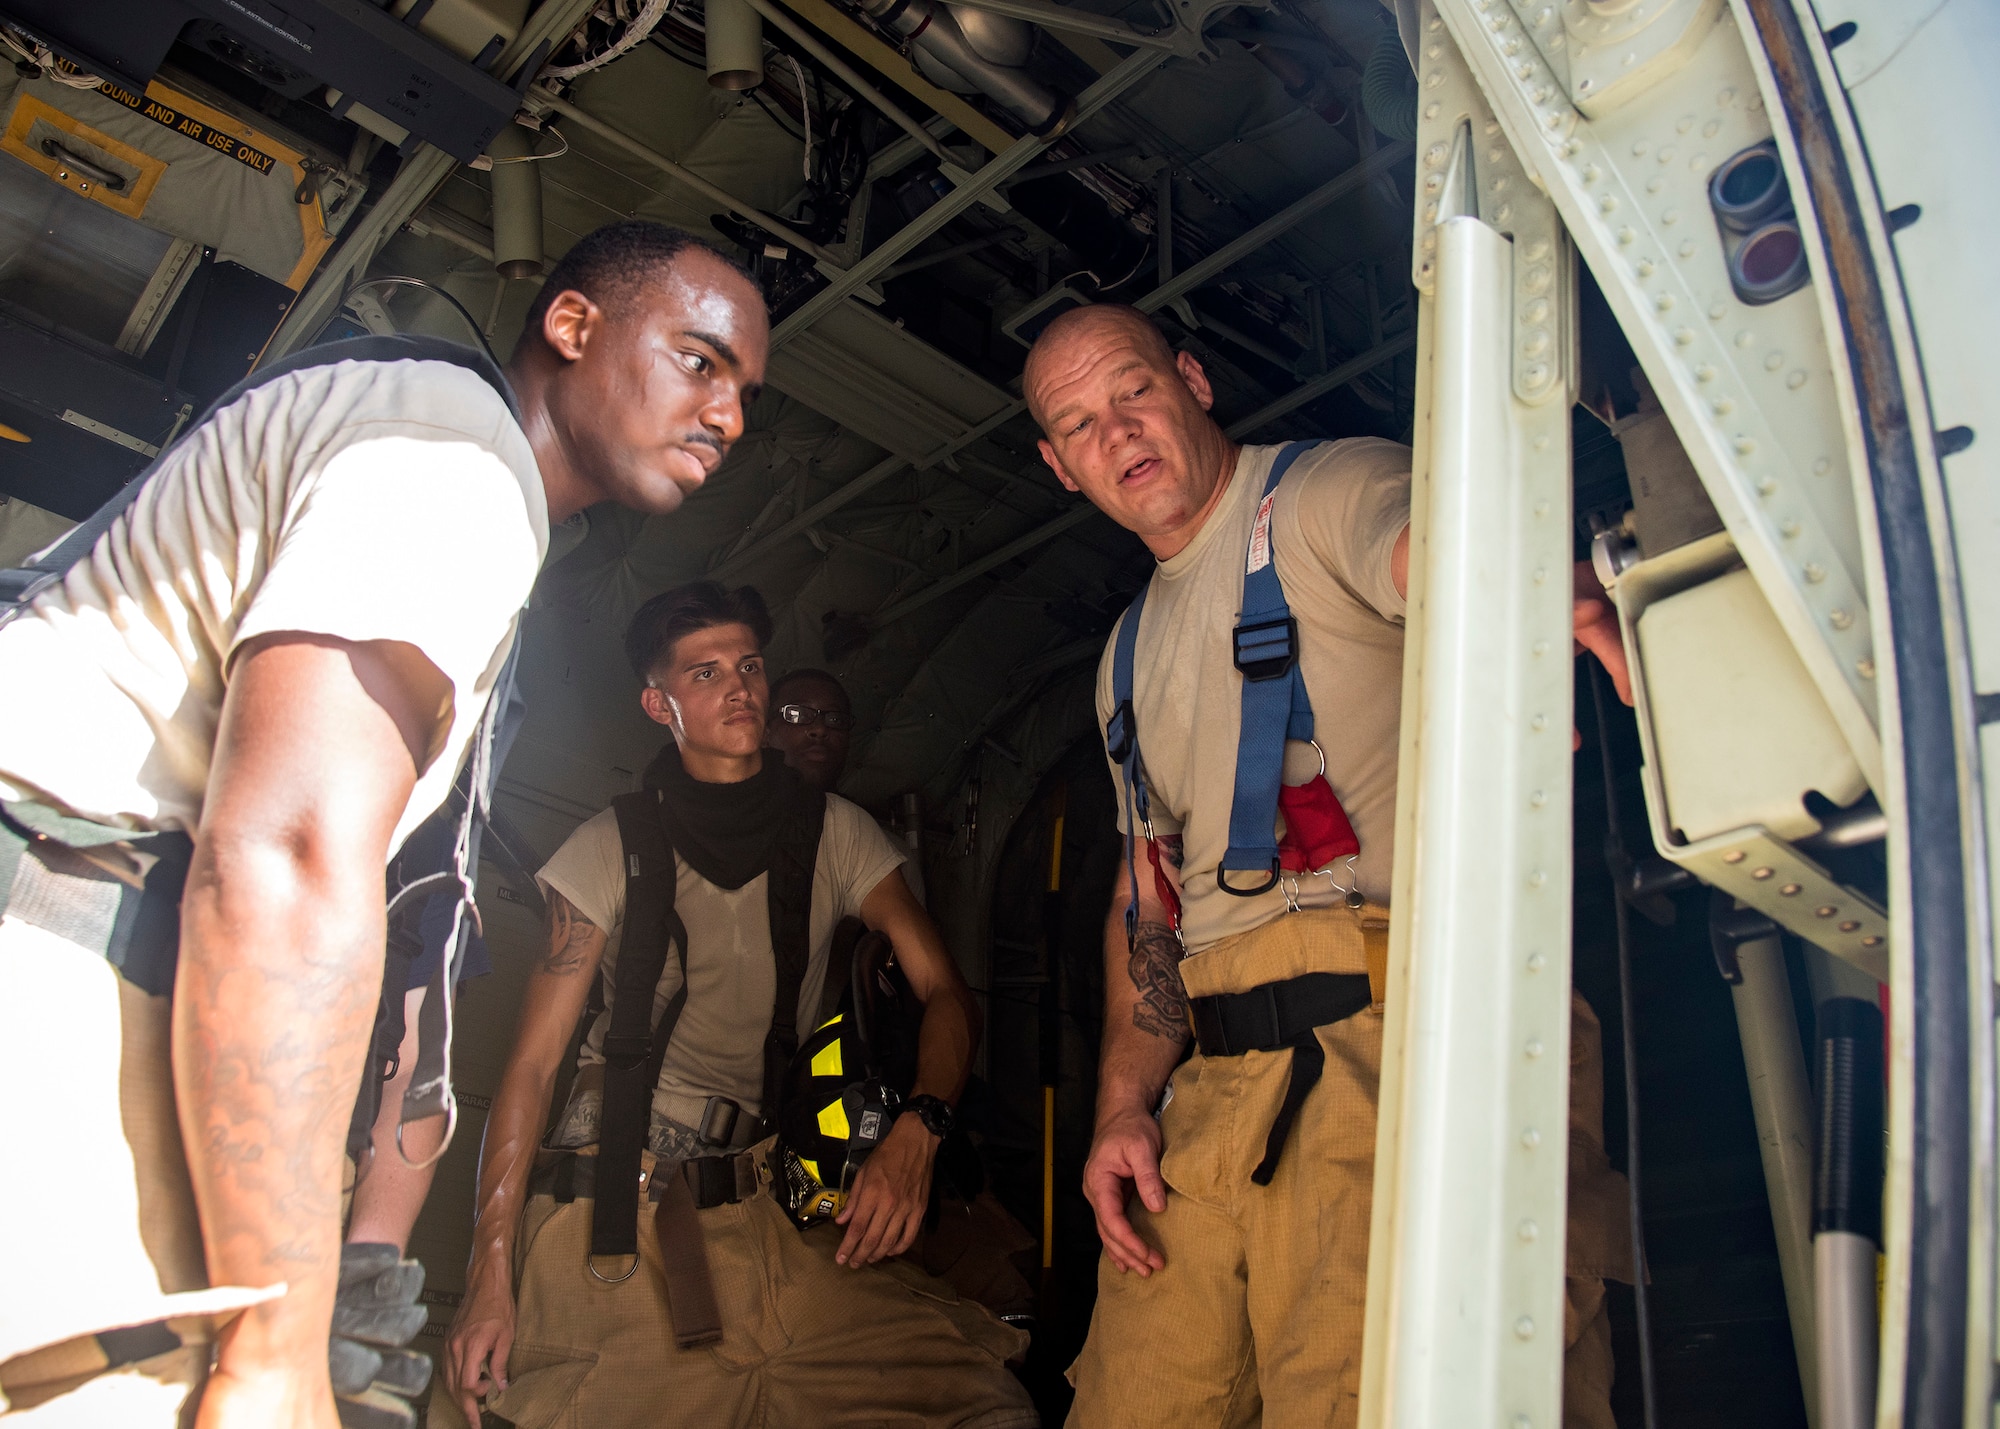 Tech. Sgt. Garey Schmidt, right, 23d Civil Engineer Squadron (CES) firefighter station chief, explains the internal components of an HC-130J Combat King II following egress training, July 11, 2019, at Moody Air Force Base, Ga. Firefighters conducted the training to evaluate their overall knowledge and proficiency of how to properly shut down and rescue personnel from a C-130 during an emergency situation. The training required the firefighters to properly enter and ventilate the aircraft while conducting swift rescue techniques to safely locate and remove passengers from the aircraft. (U.S. Air Force photo by Airman 1st Class Eugene Oliver)